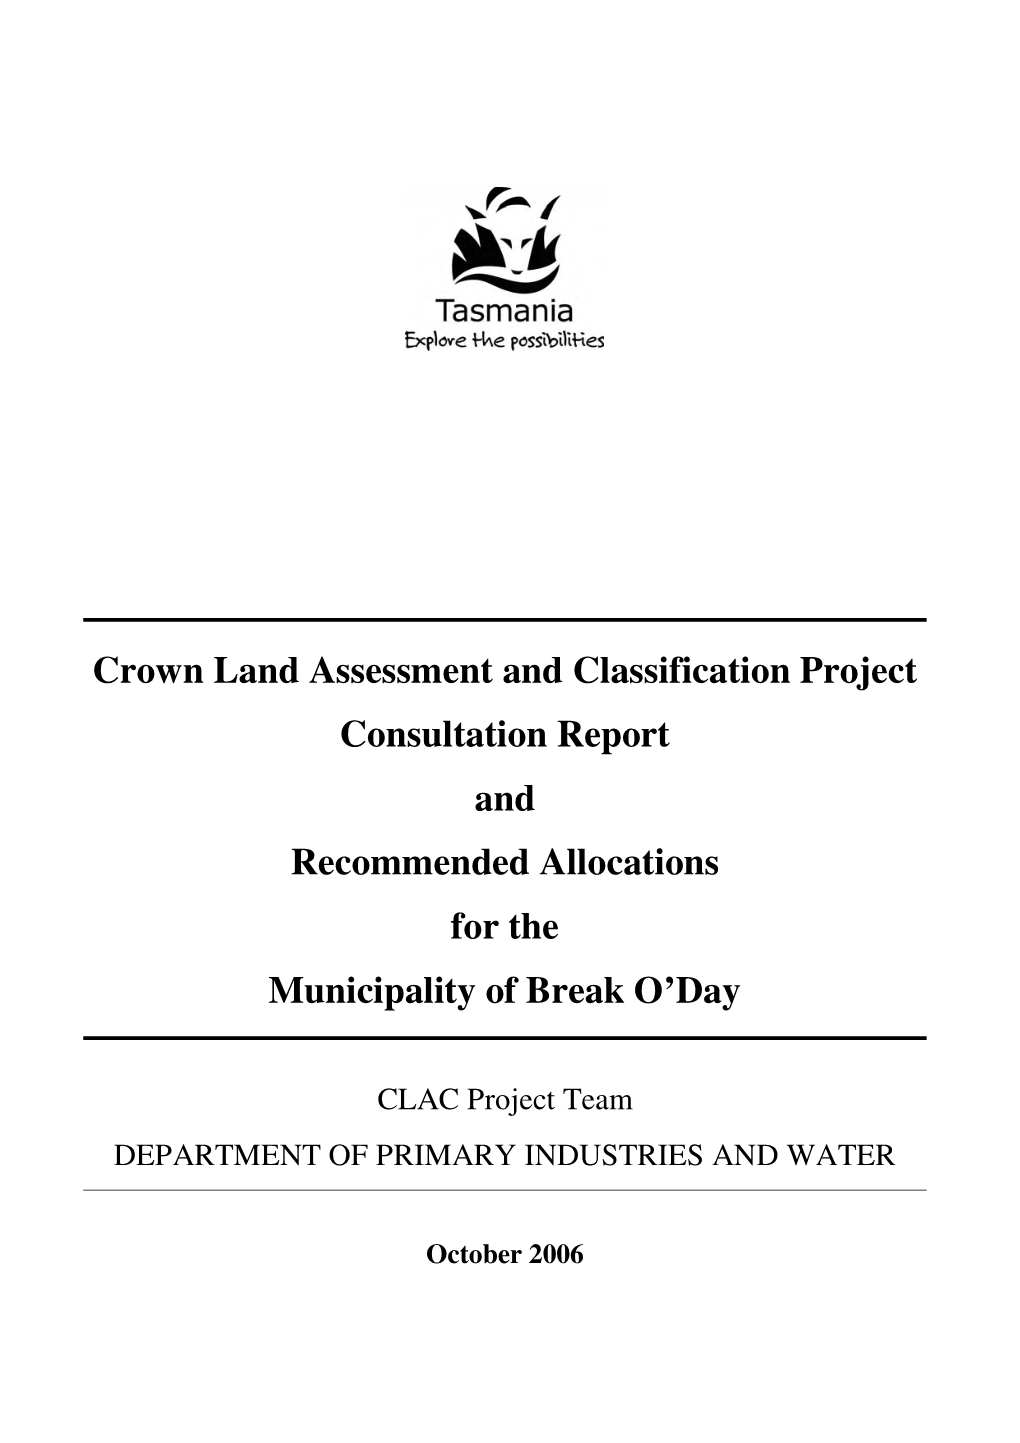 Crown Land Assessment and Classification Project Consultation Report and Recommended Allocations for the Municipality of Break O’Day